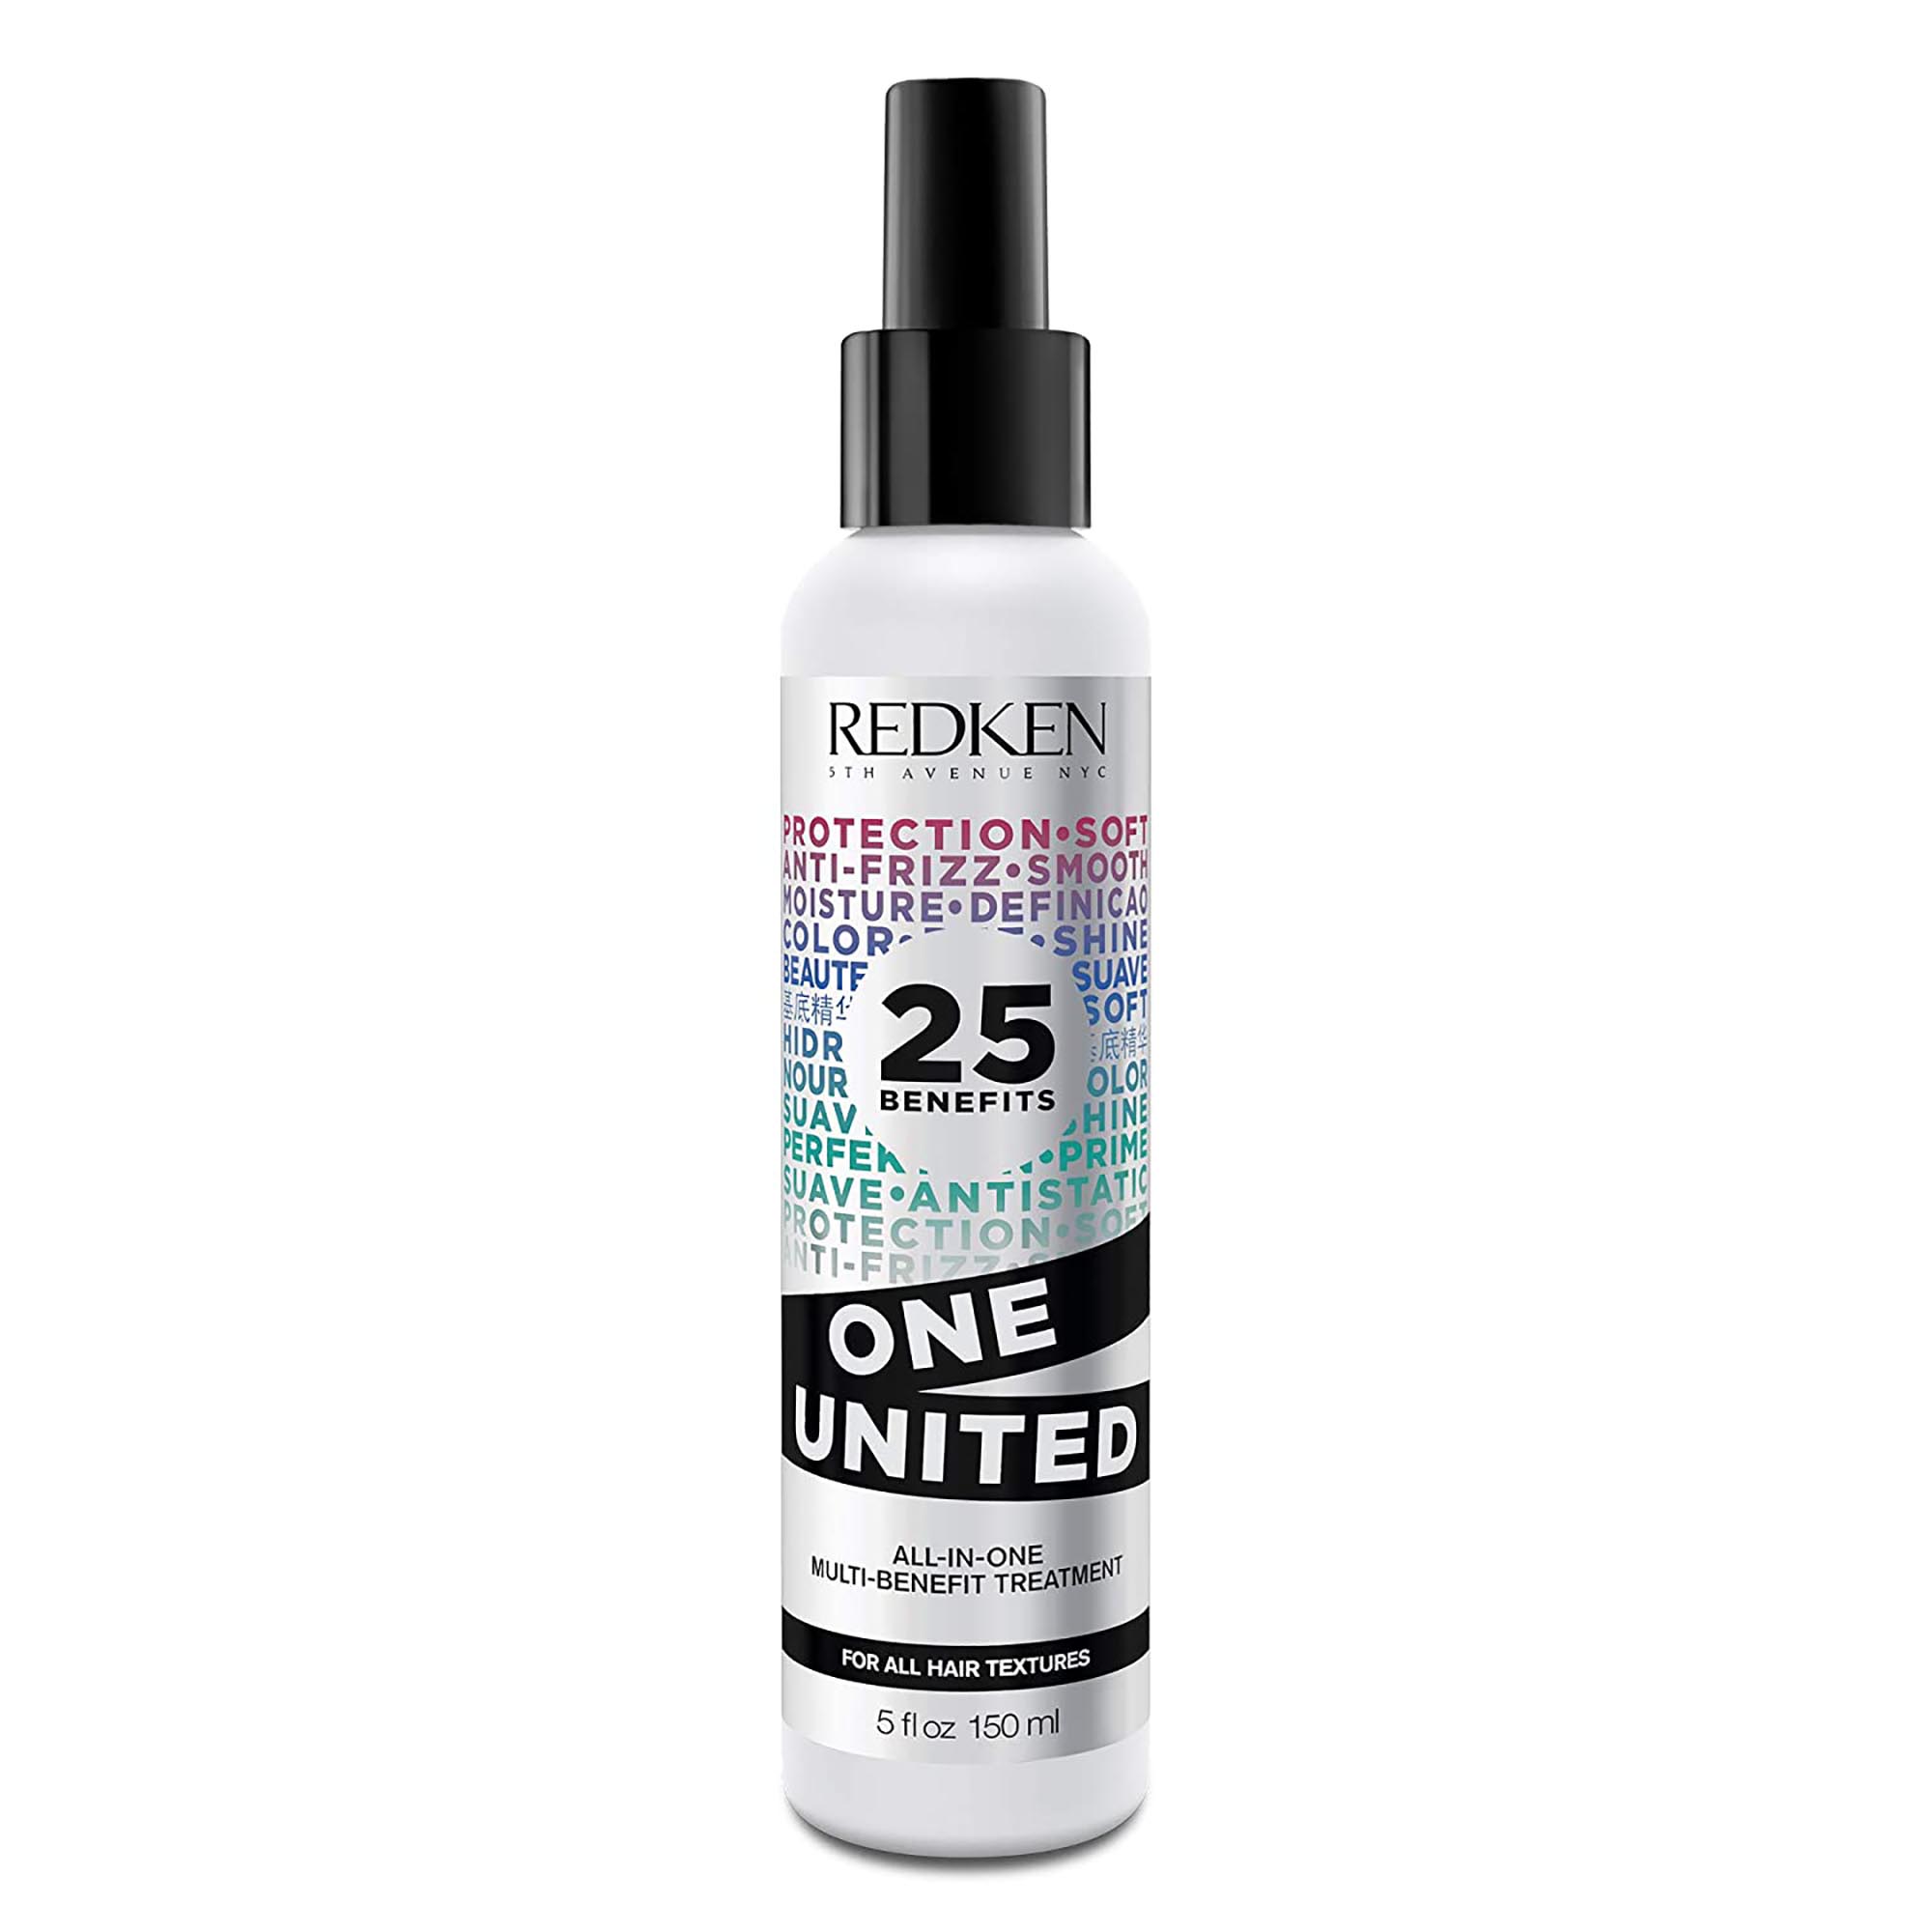 Redken One United All-in-One Multi-Benefit Treatment / 5.OZ